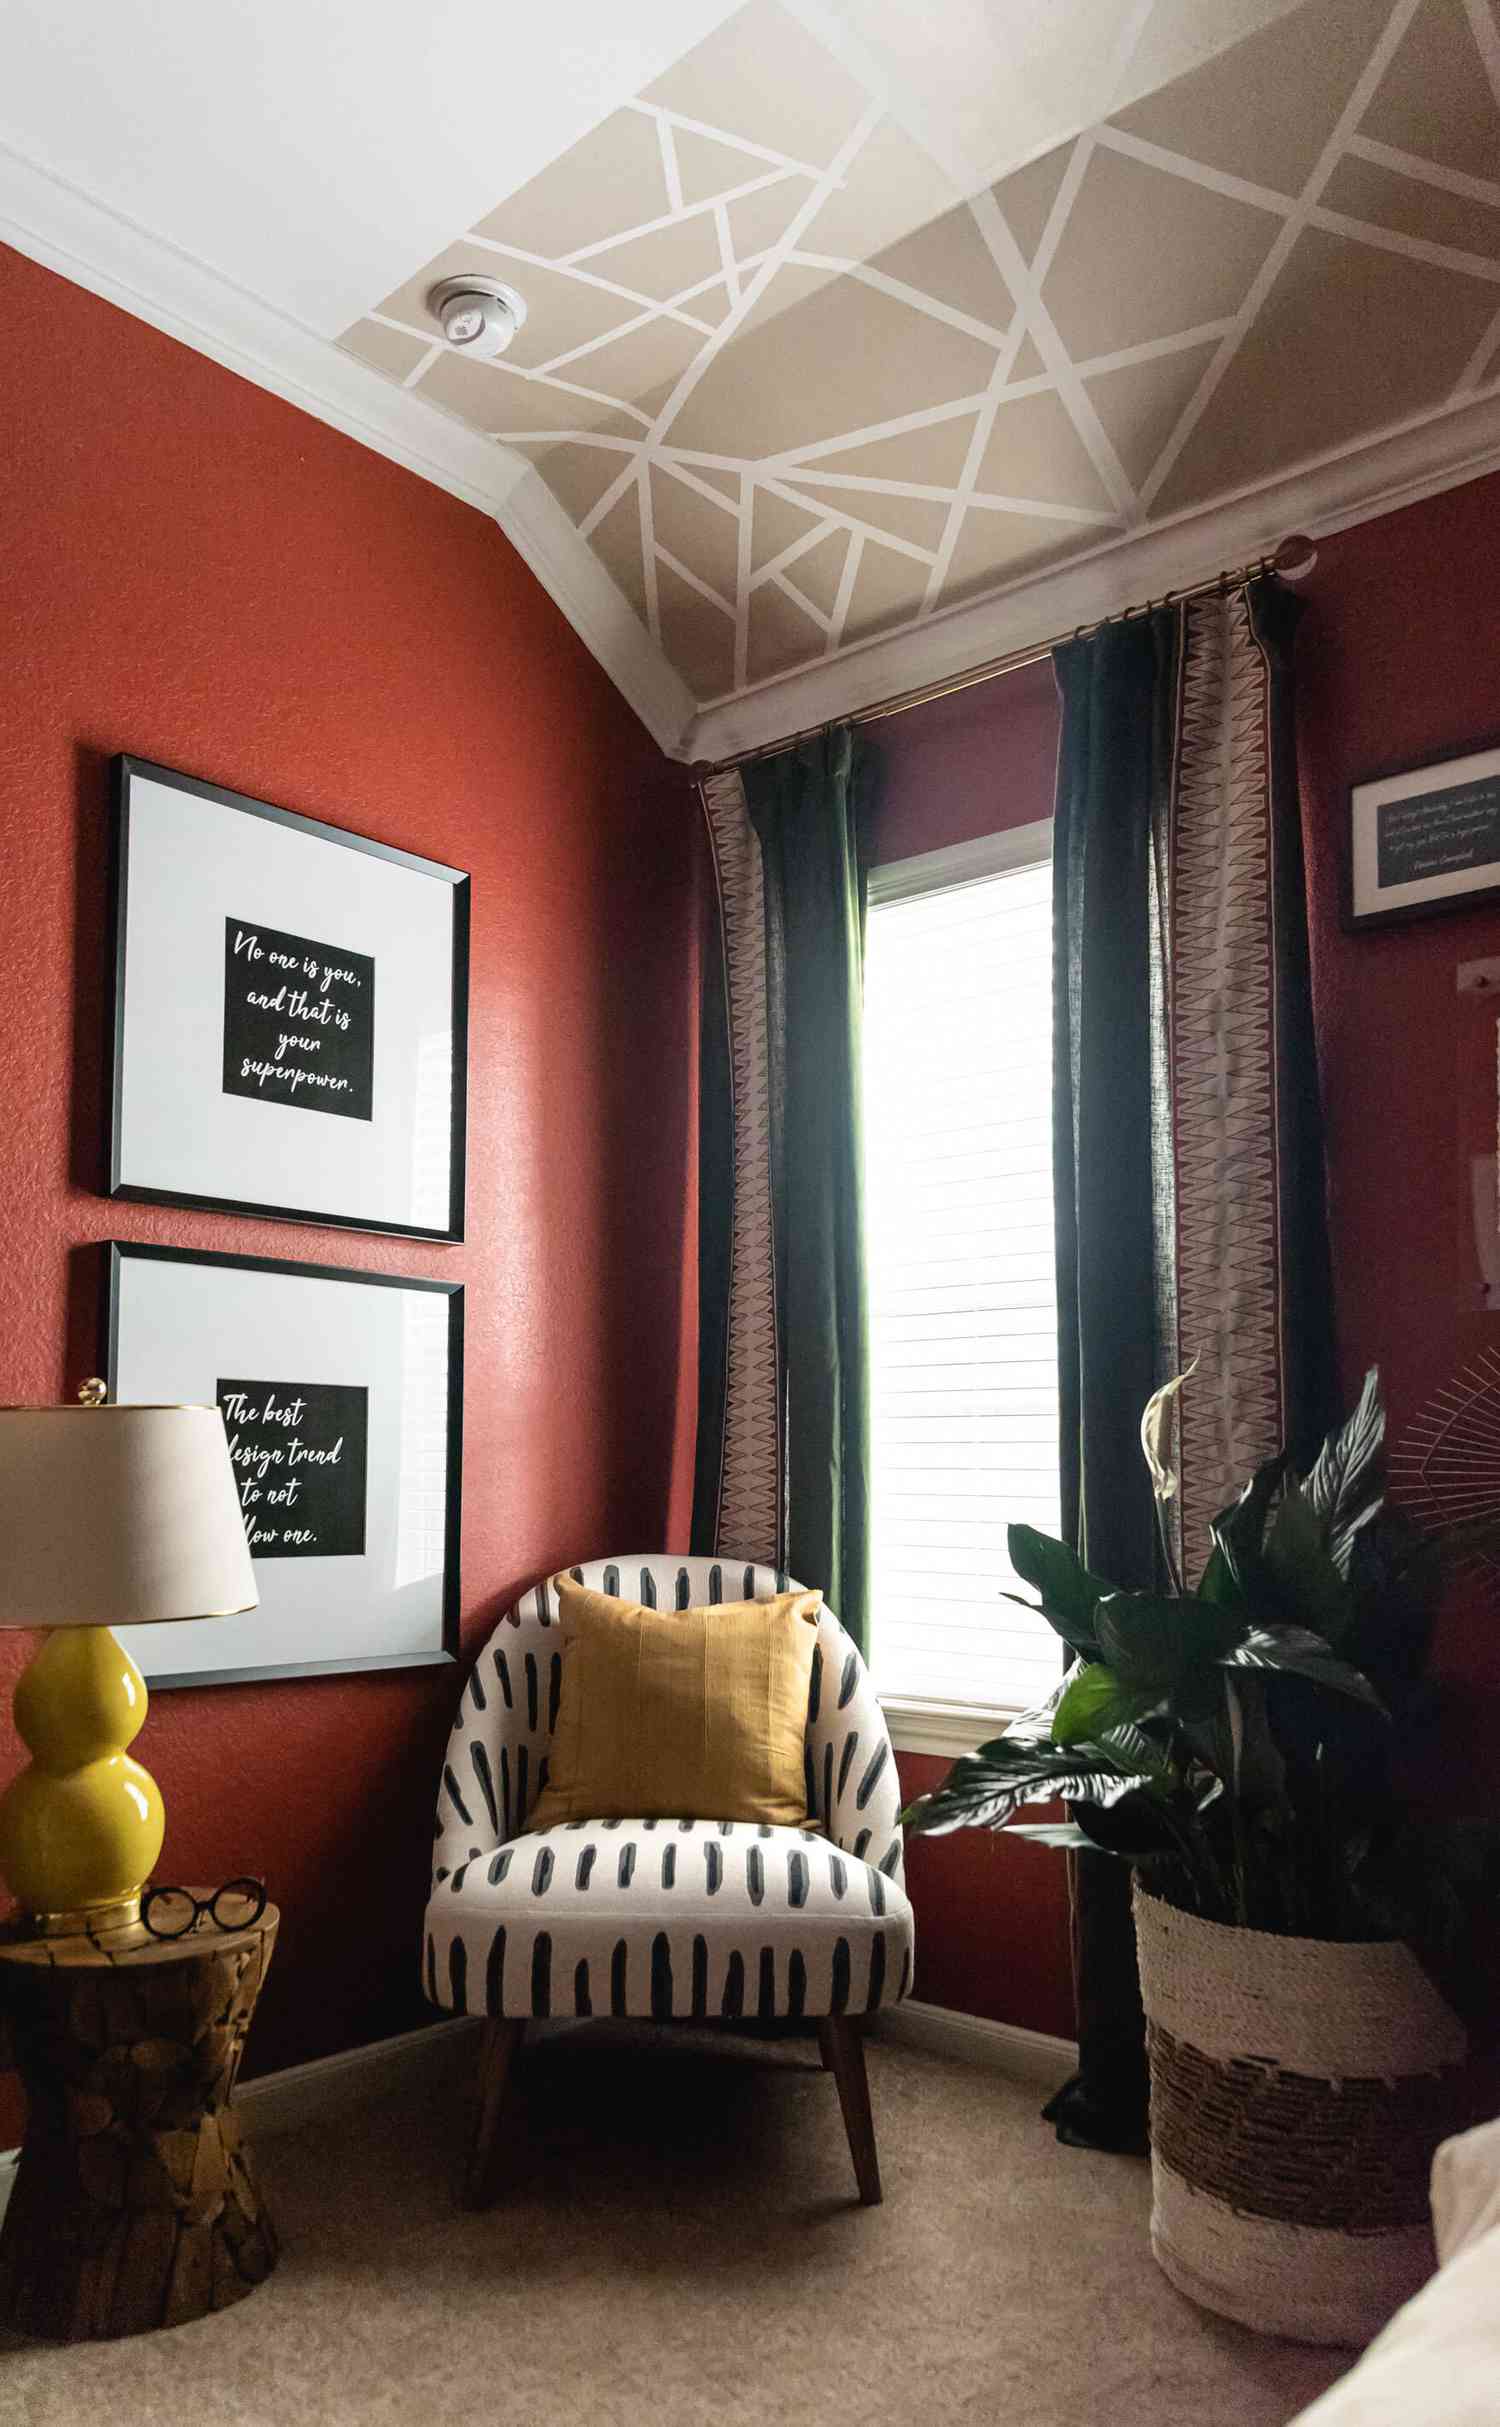 red bedroom with white and black pattern chair, red walls, mural on ceiling